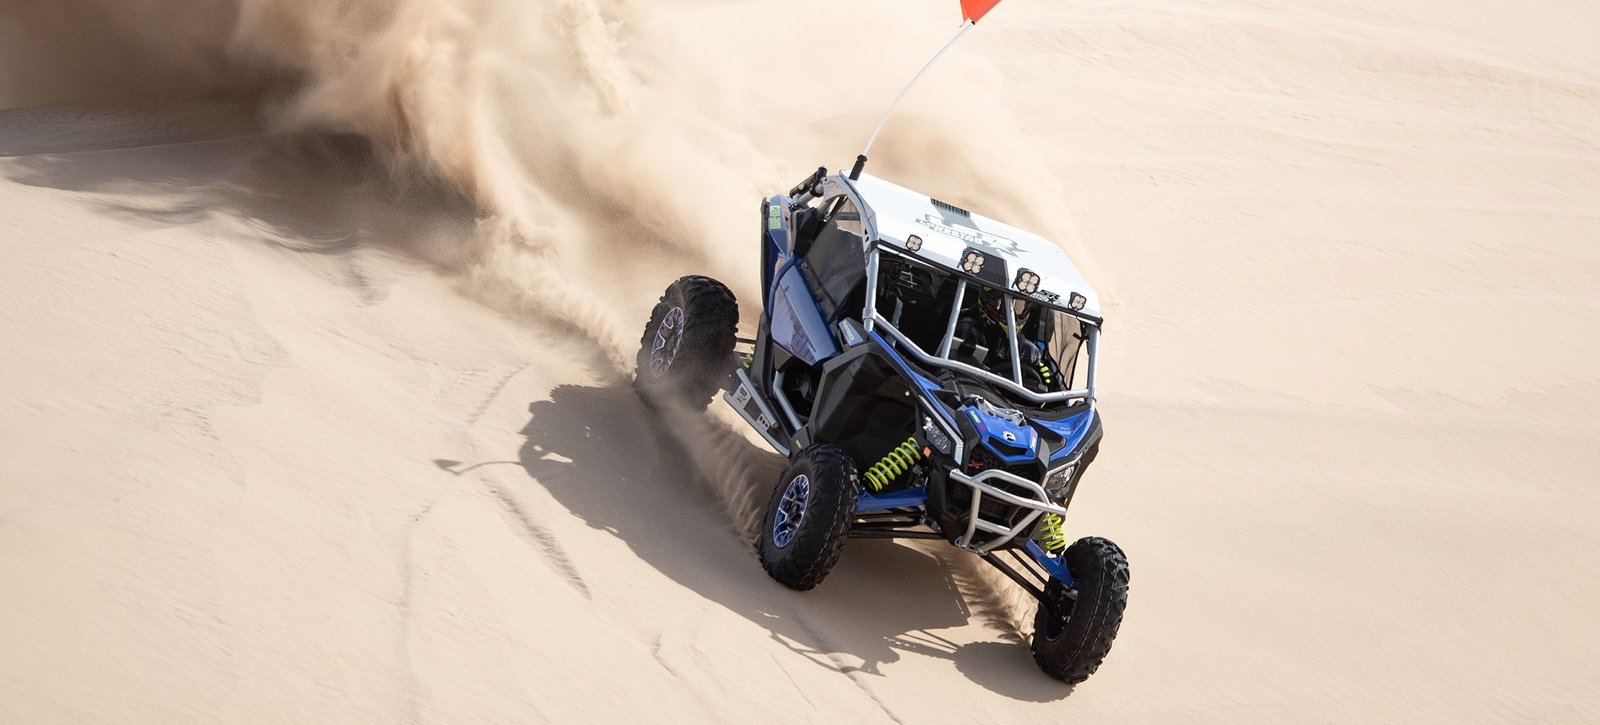 Can-Am Models Factory Equipped with Rockford Fosgate Audio: Can-Am Maverick X3 at Sand Dunes.